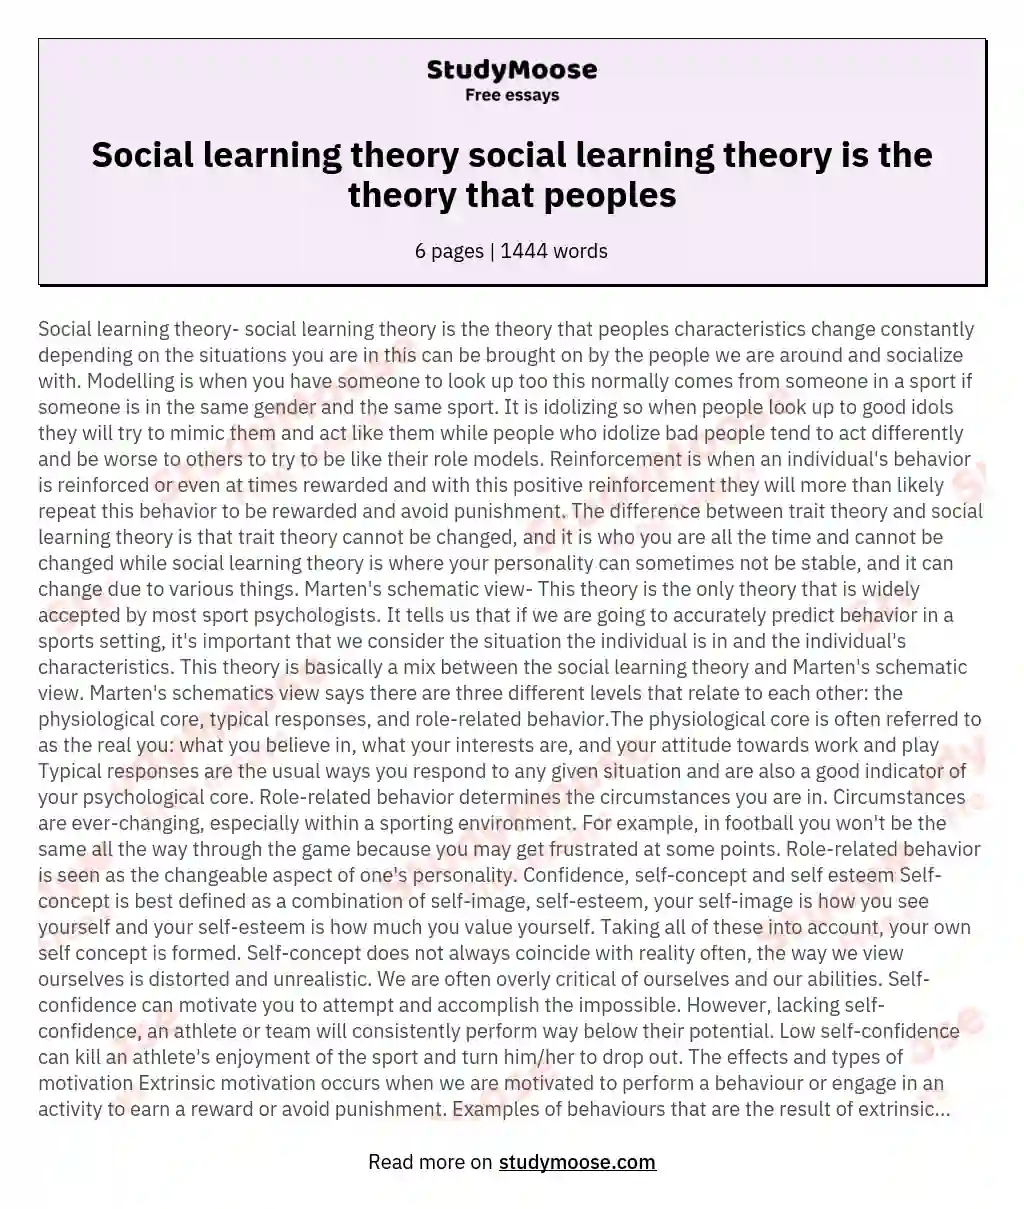 Social learning theory social learning theory is the theory that peoples